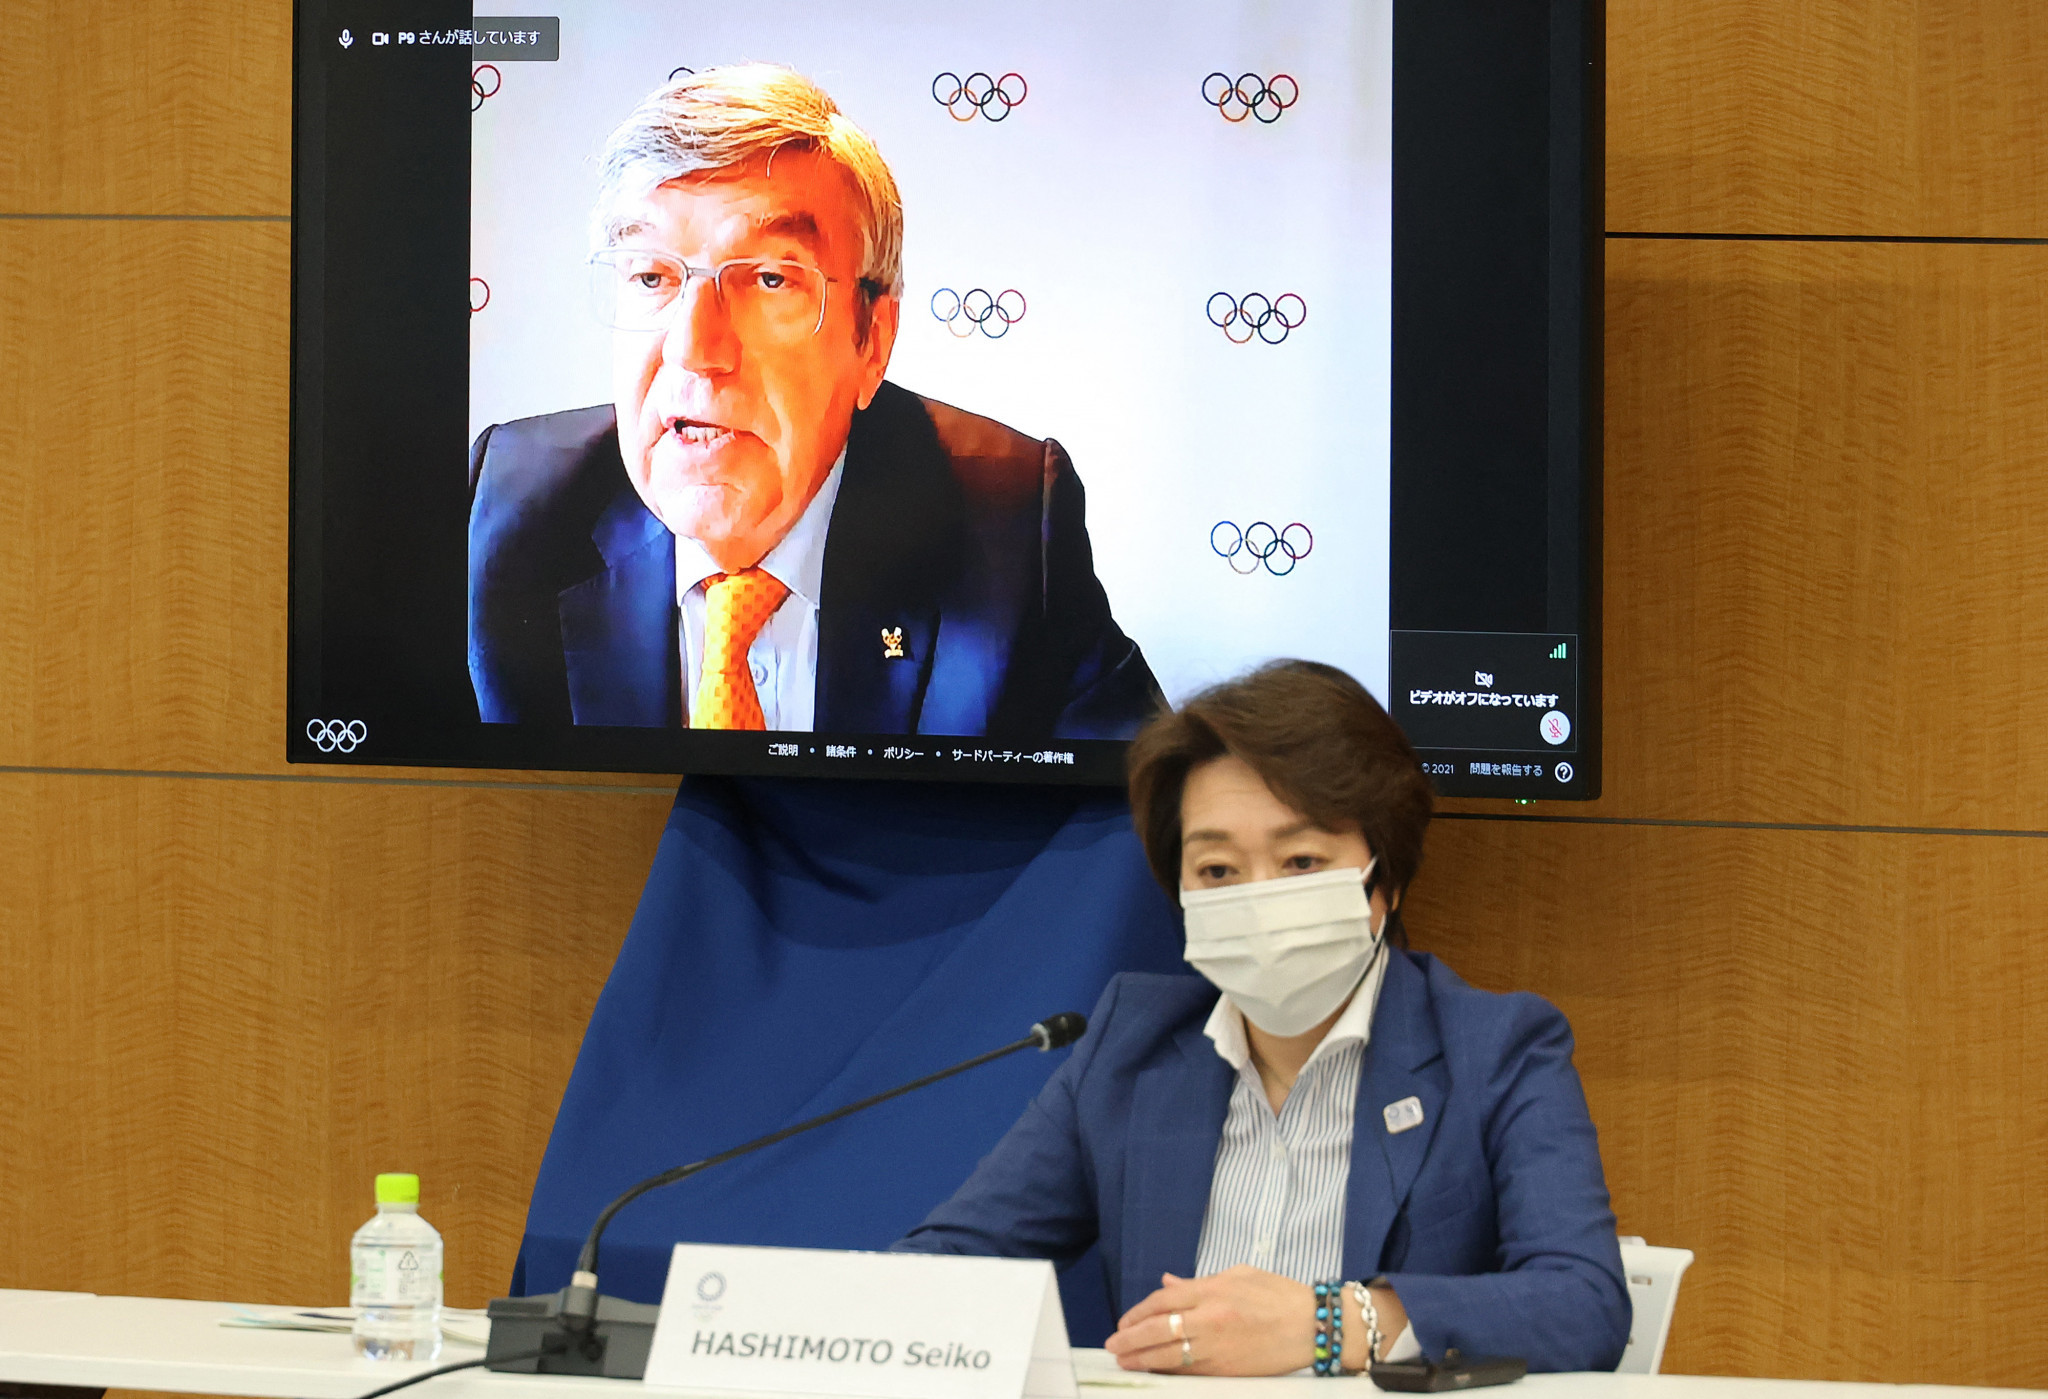 Thomas Bach, top, said discussions had taken pace with Tokyo 2020 over the practicalities of a visit, and it was decided one would not be helpful ©Getty Images